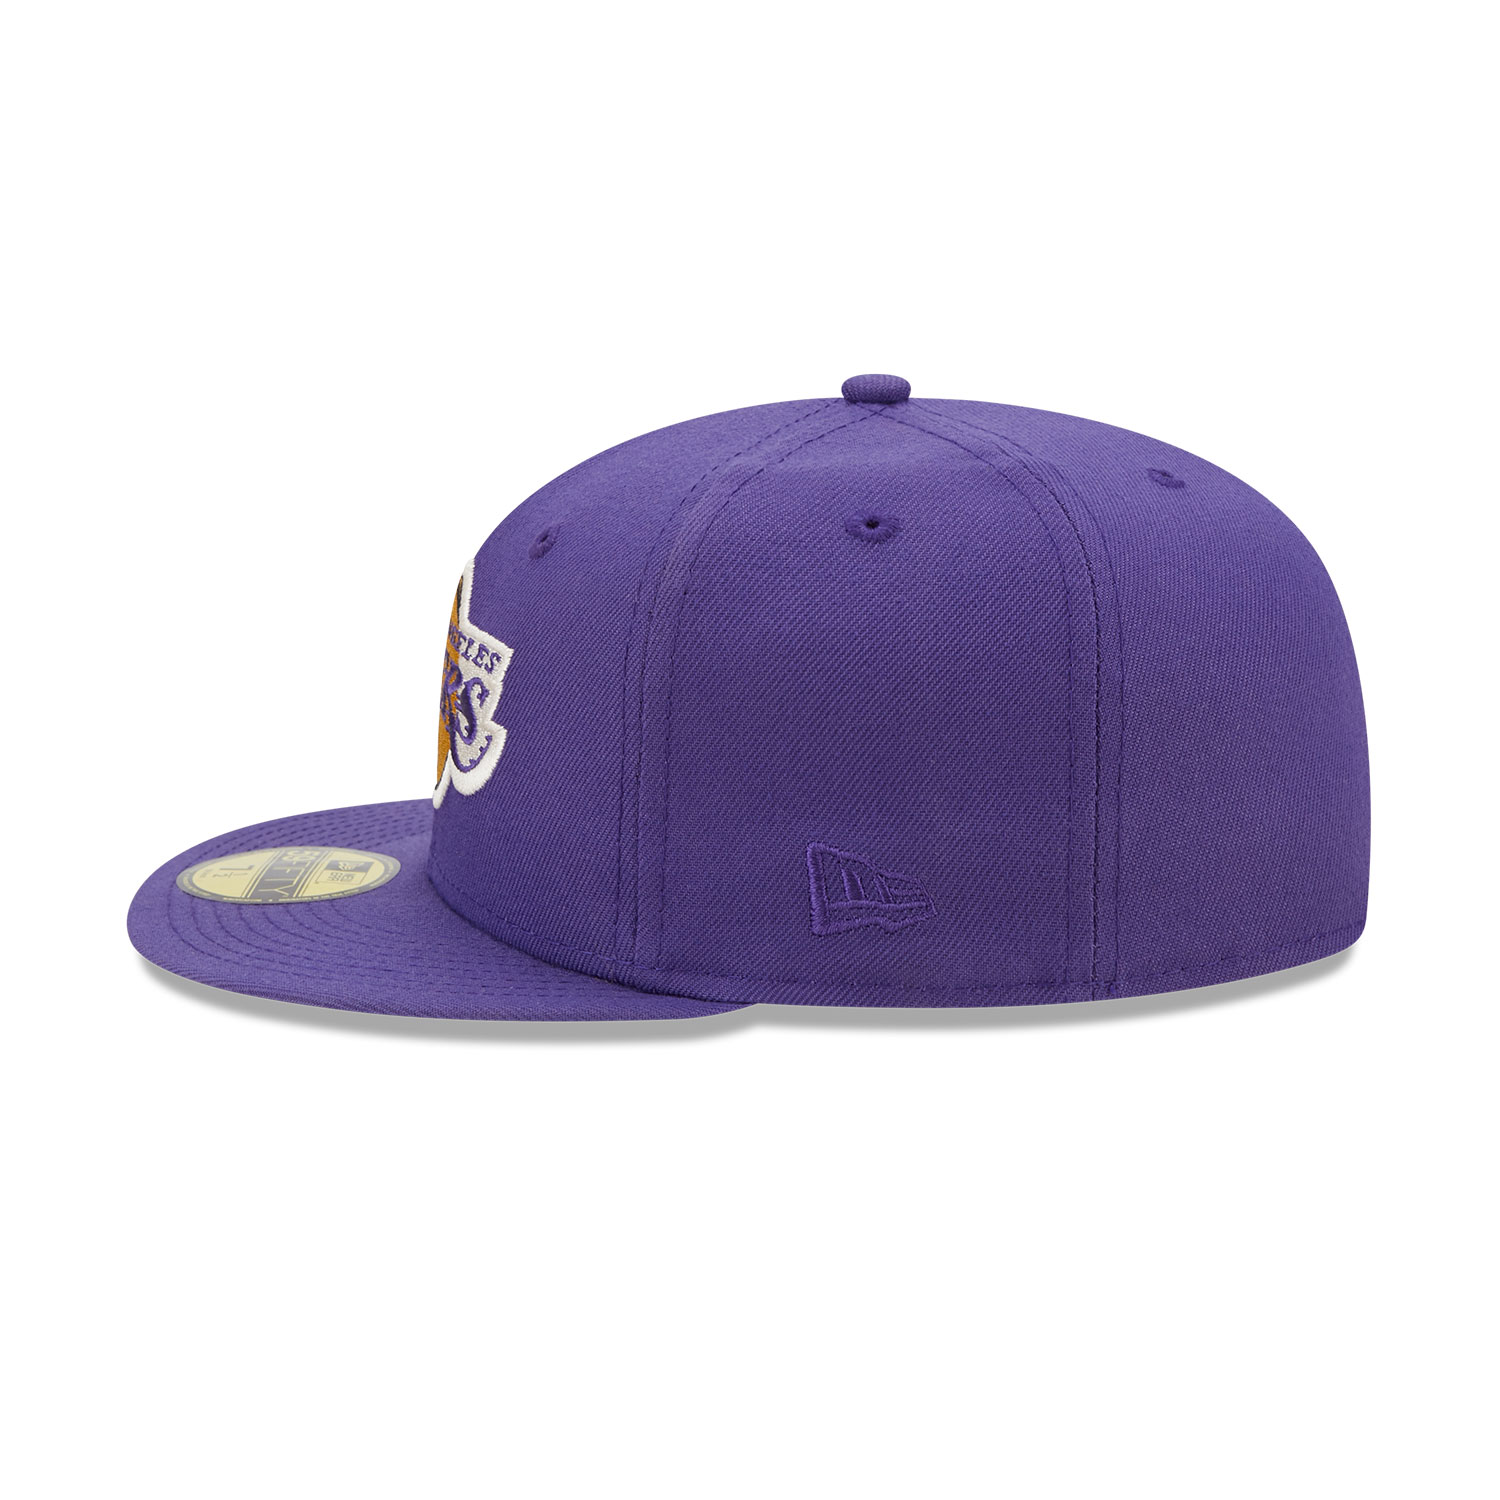 LA Lakers Twilight Fantasy Purple 59FIFTY Fitted Cap